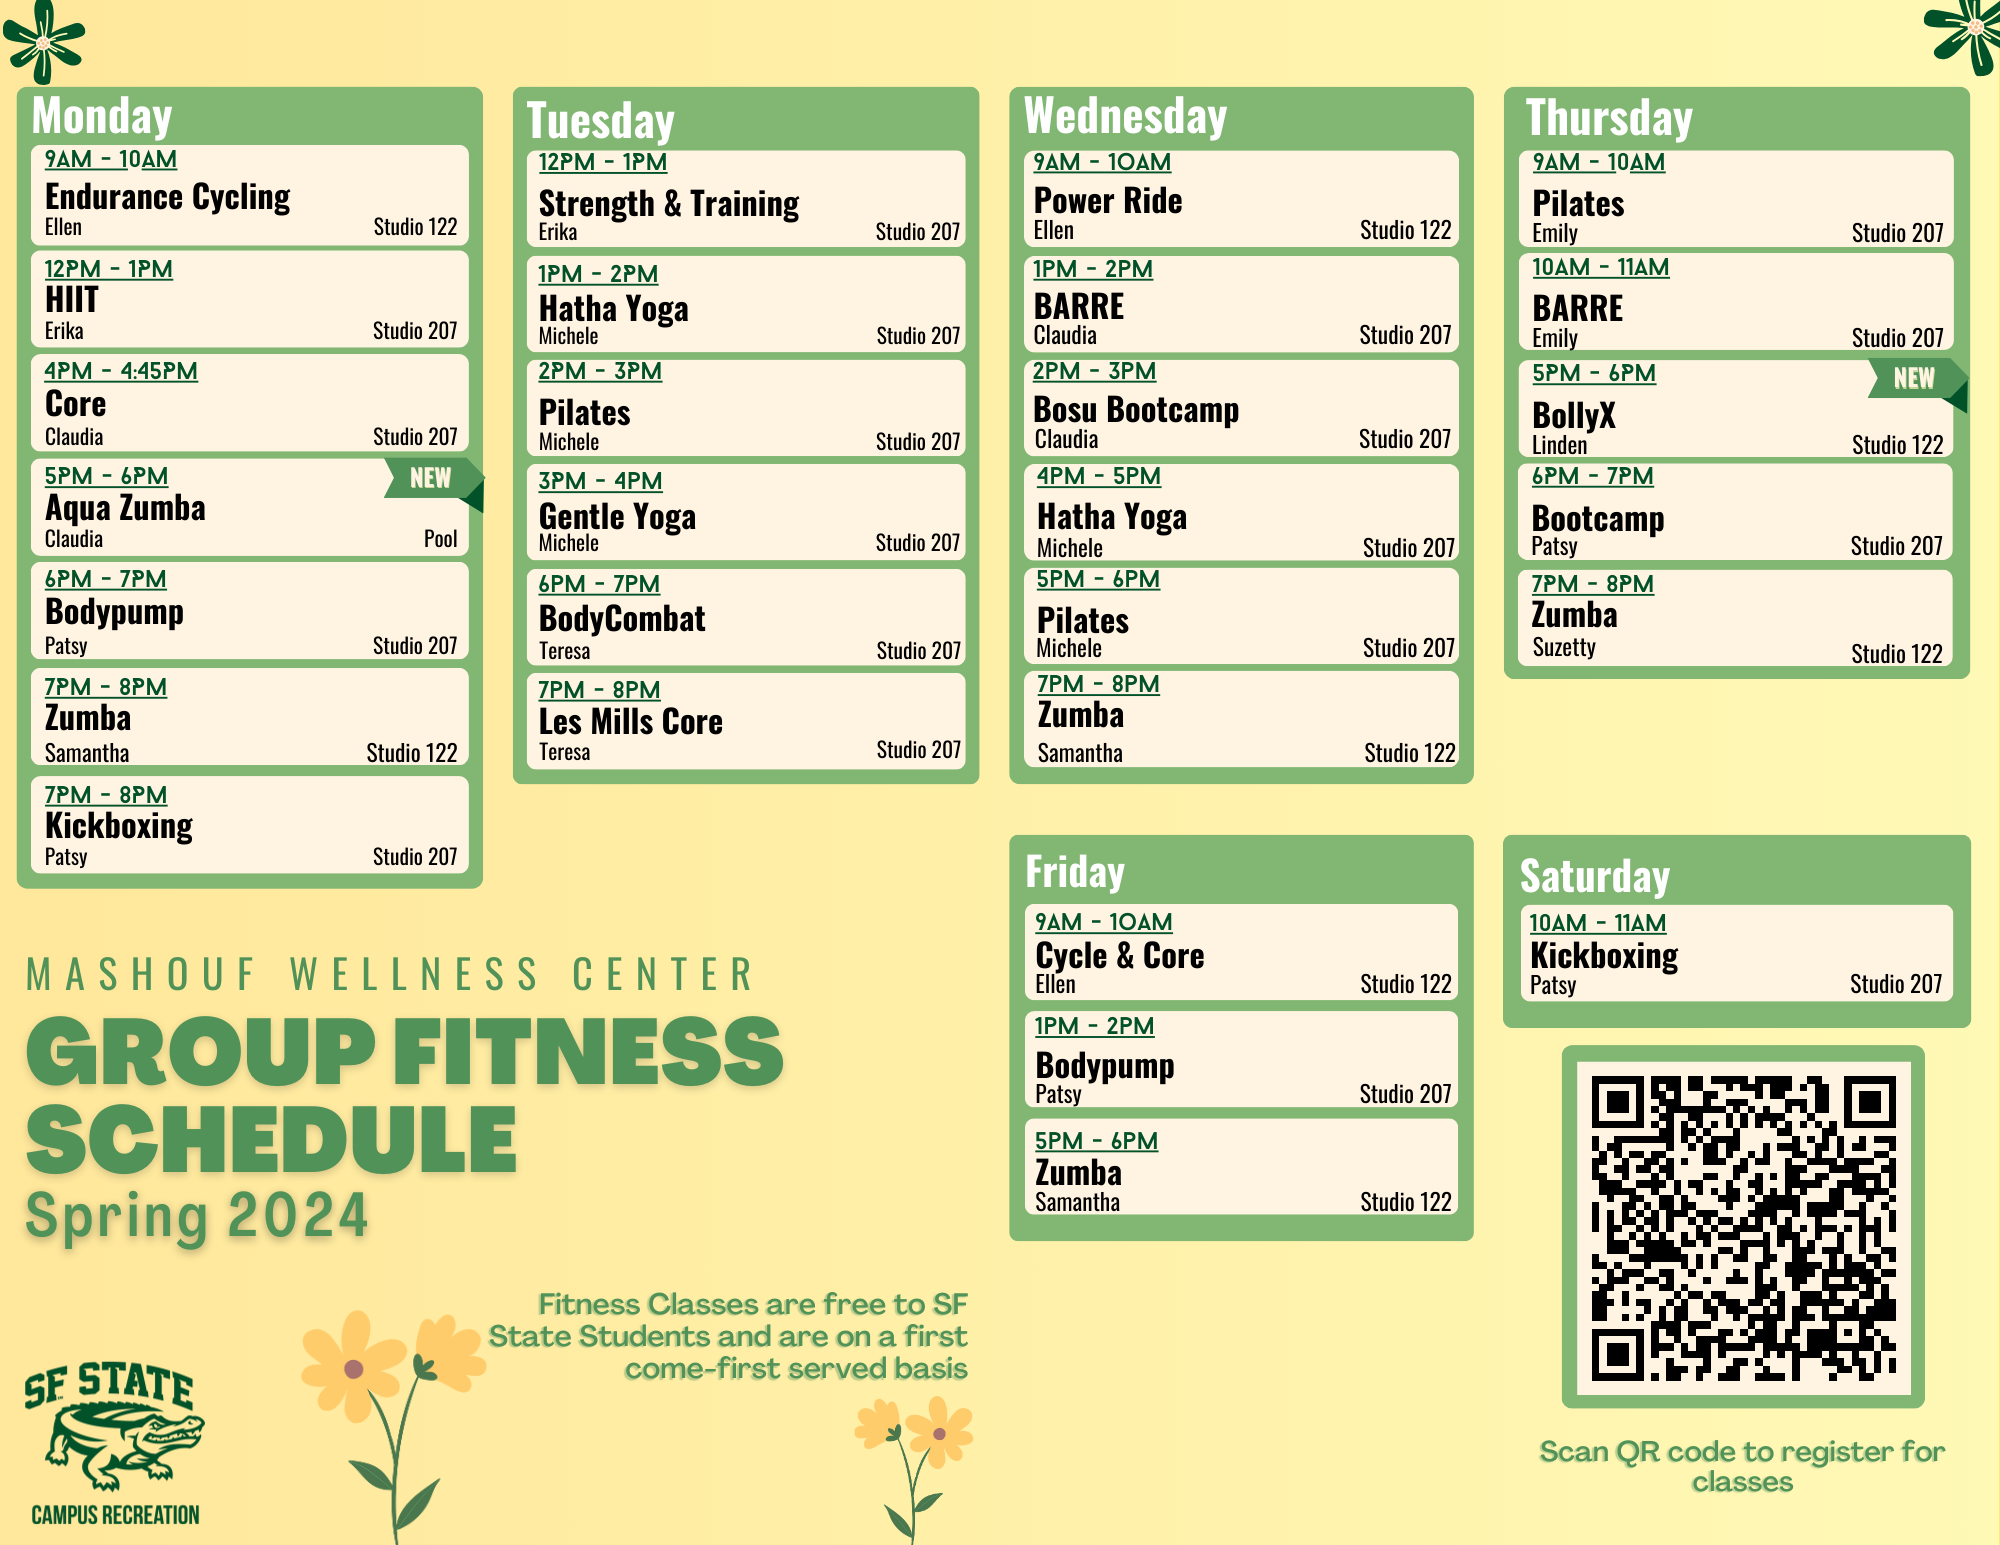 Group Fitness Schedule Spring 2024